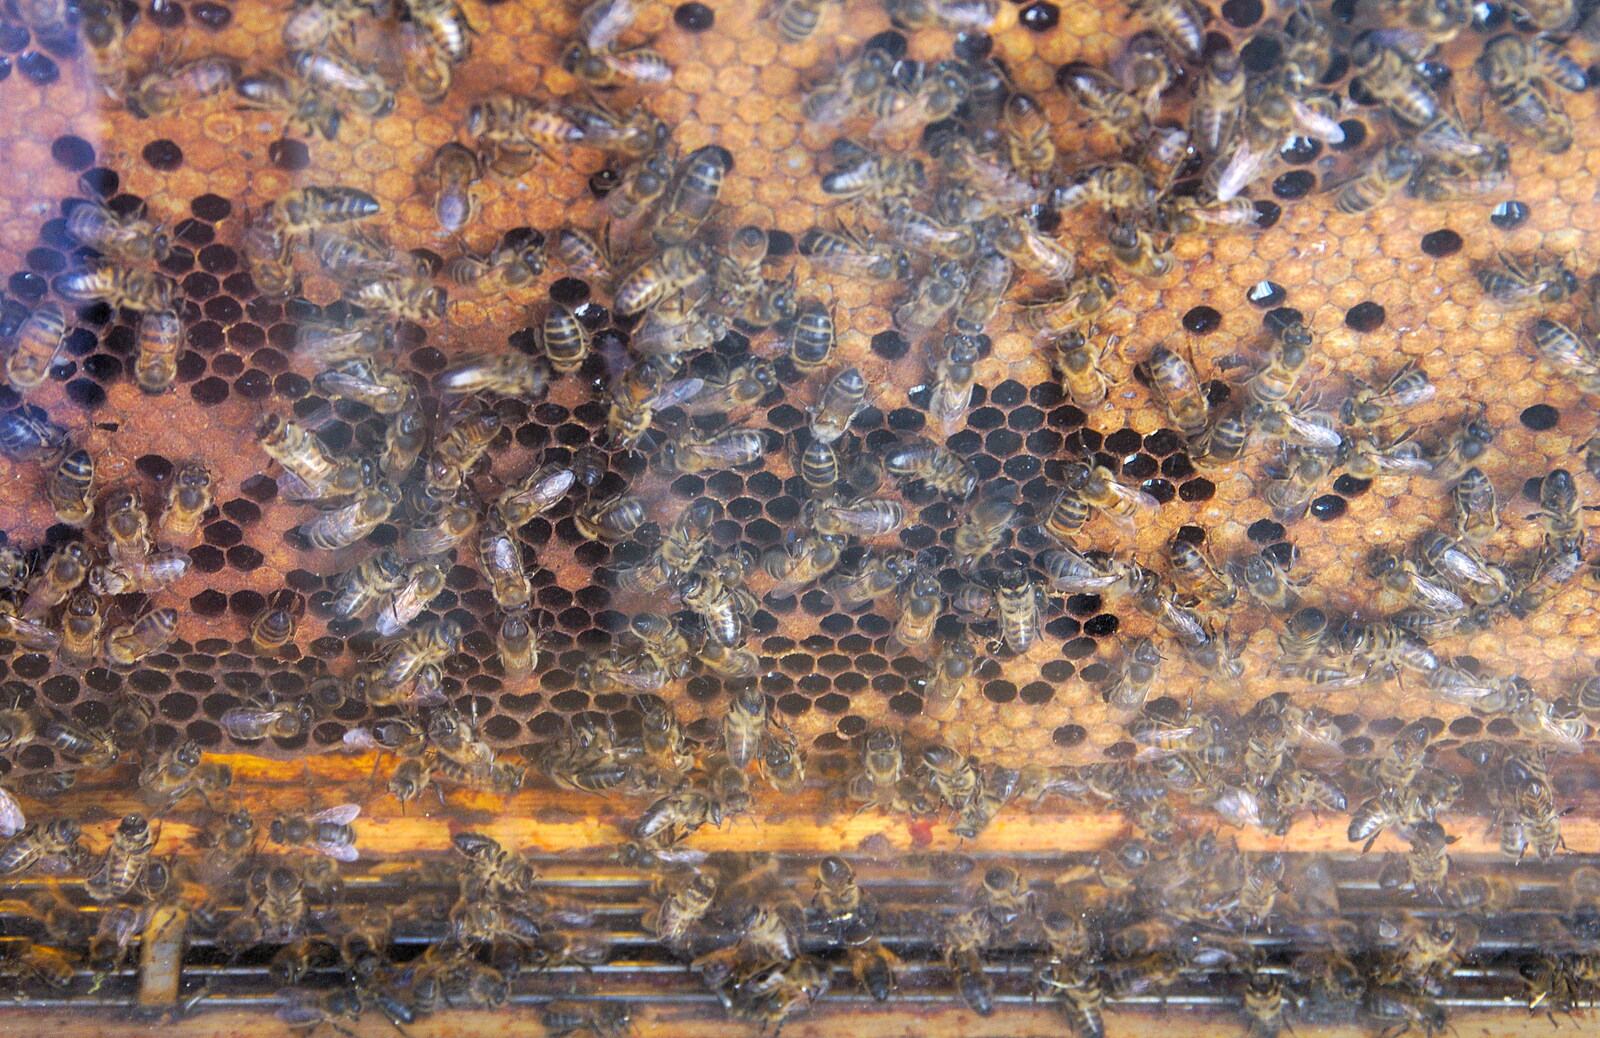 A load of bees in a glass-sided bee hive from The Gislingham Silver Band at Walsham Le Willows, Suffolk - 26th August 2019